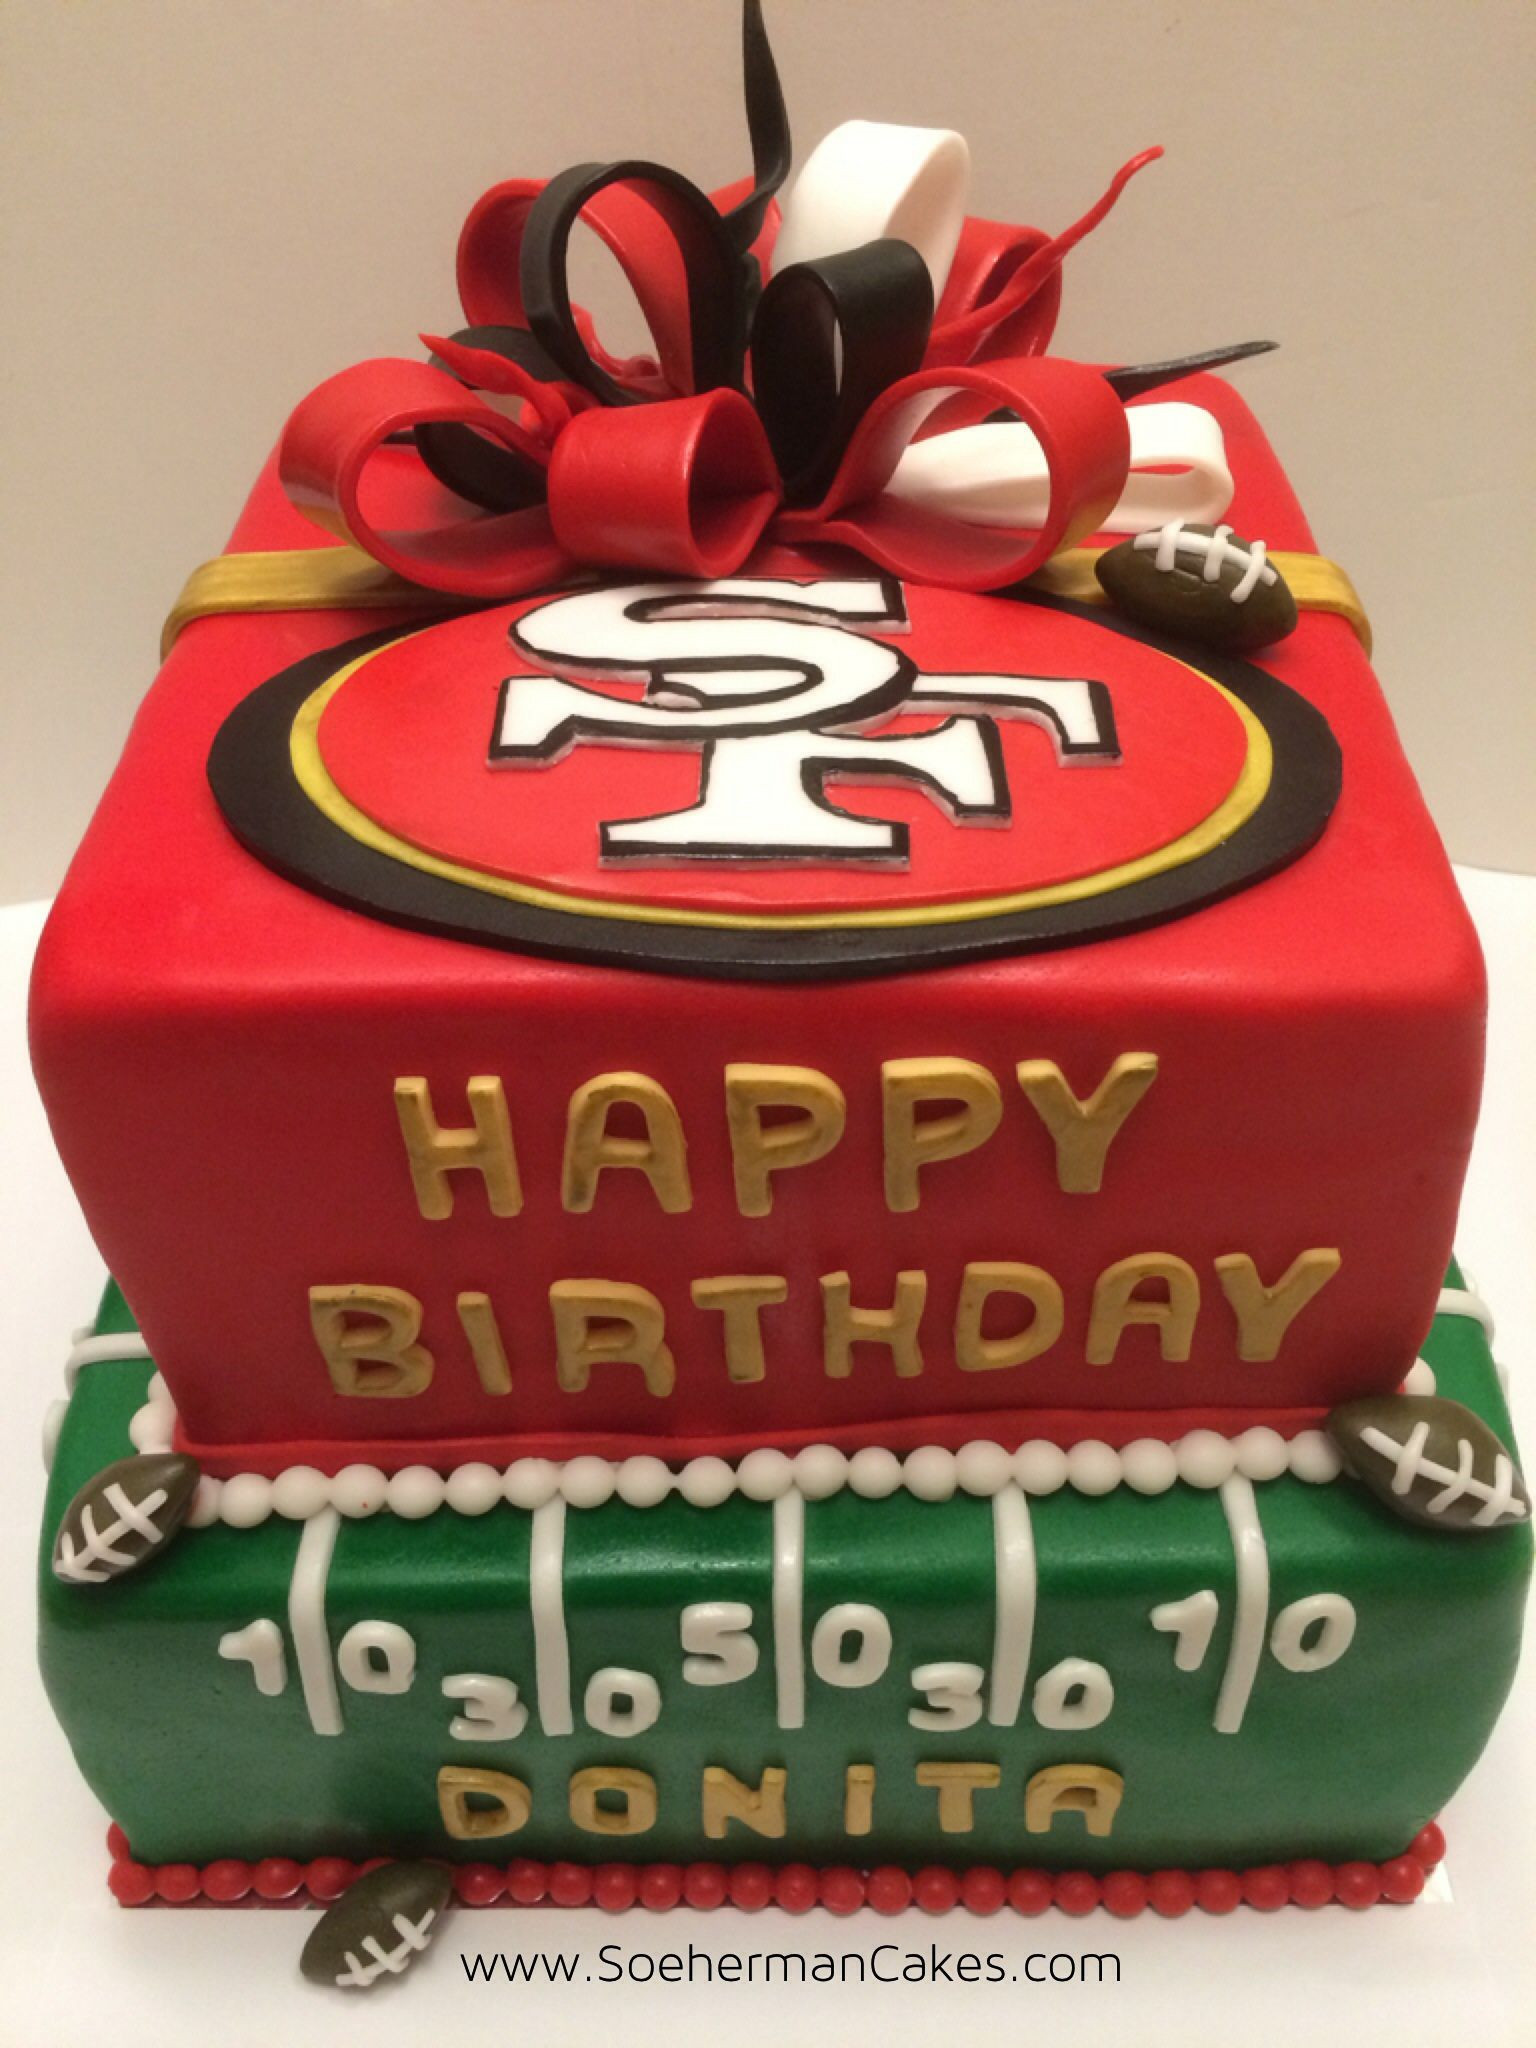 Birthday Cakes San Francisco
 49ers Cake without bow for Logan s 1st birthday